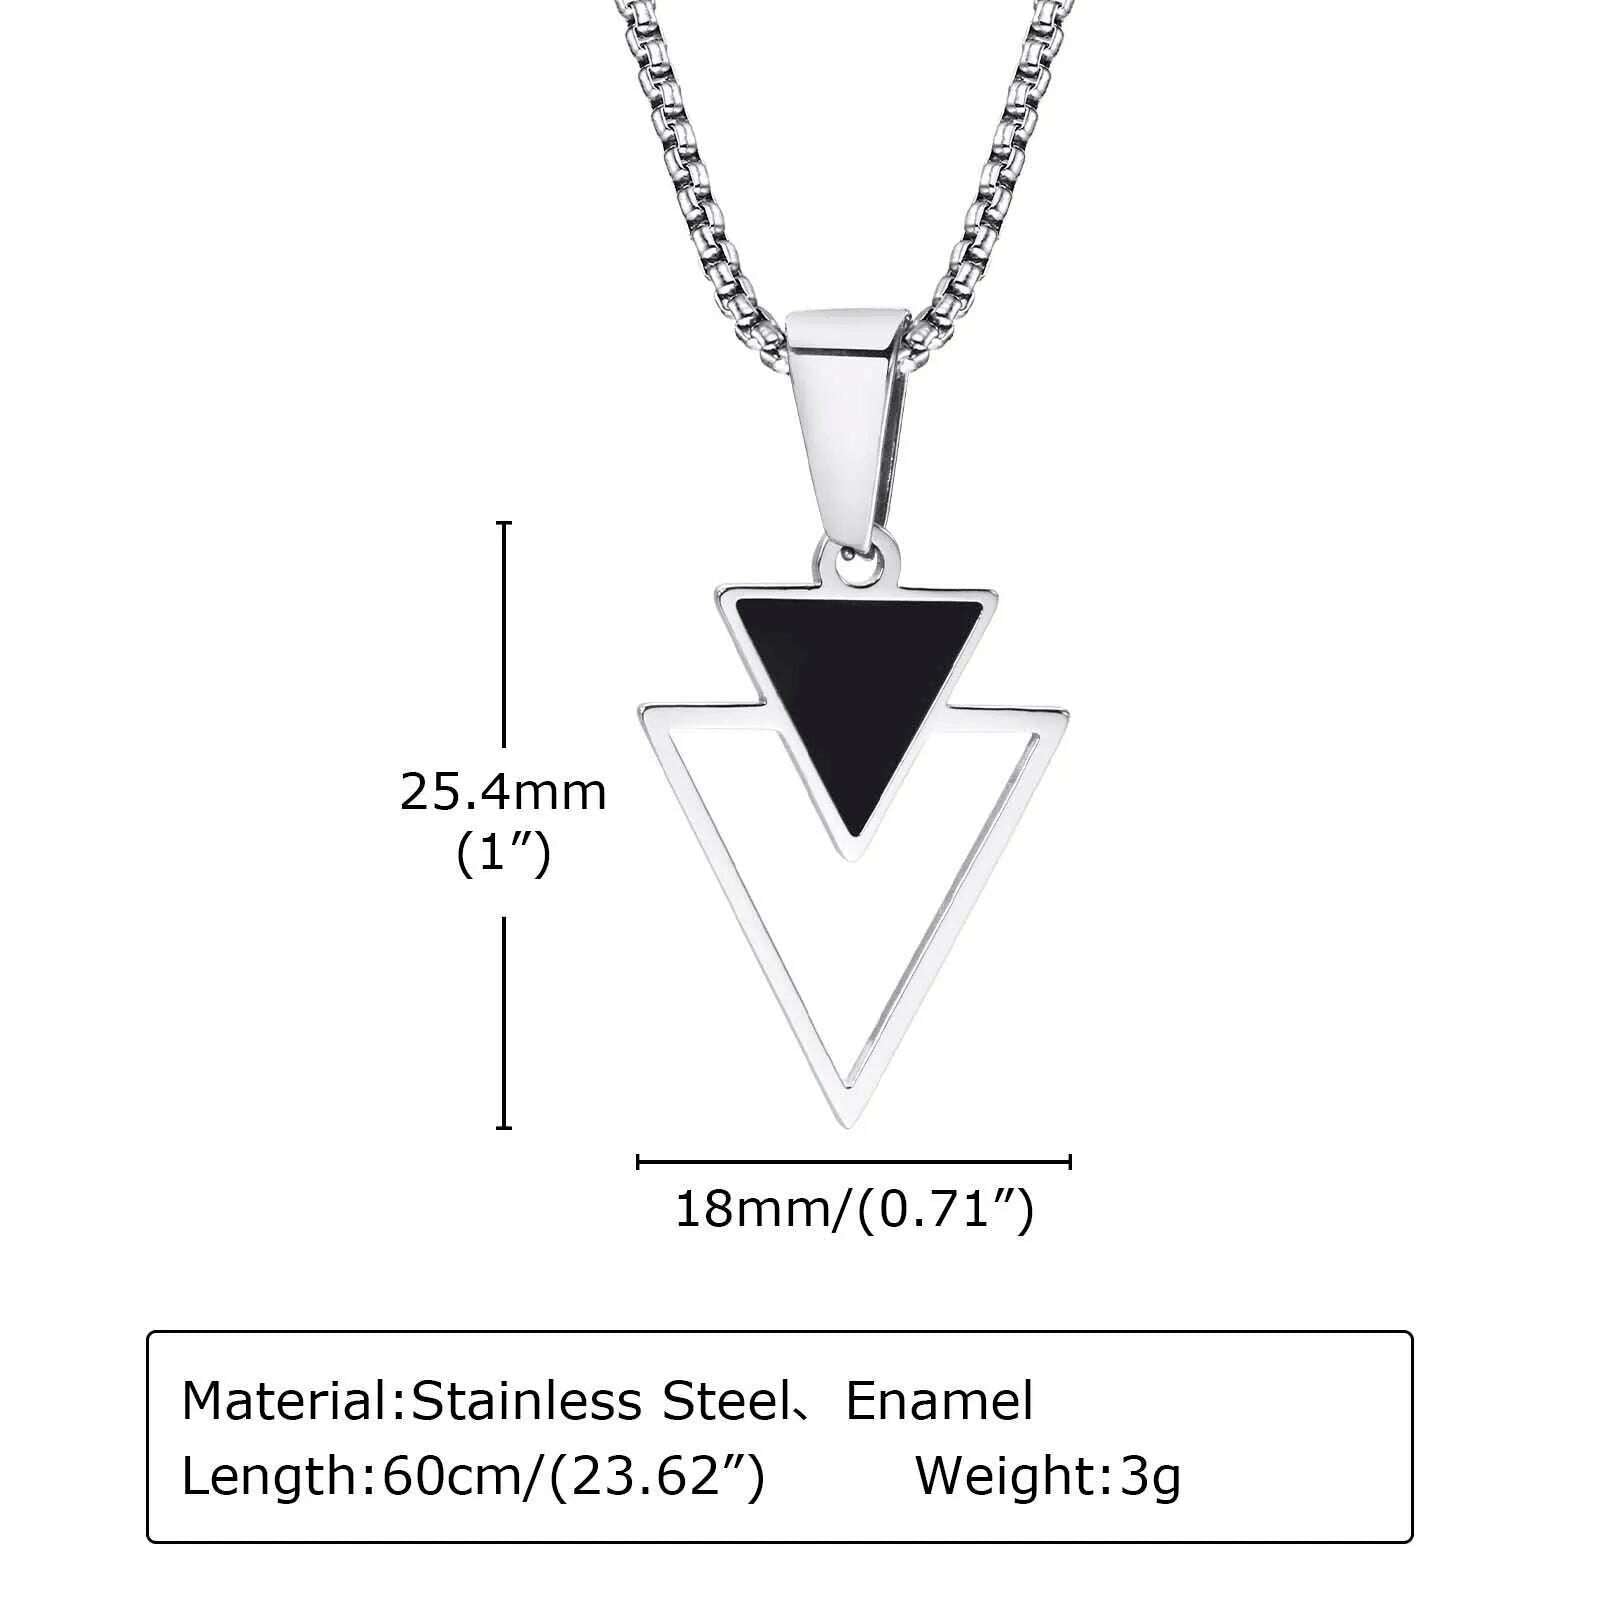 KIMLUD, Vnox New Fashion Triangle Pendant Necklace for Men Boys, Minimalist Stainless Steel Hollow Geometric Collar Male Jewelry Gift, KIMLUD Womens Clothes